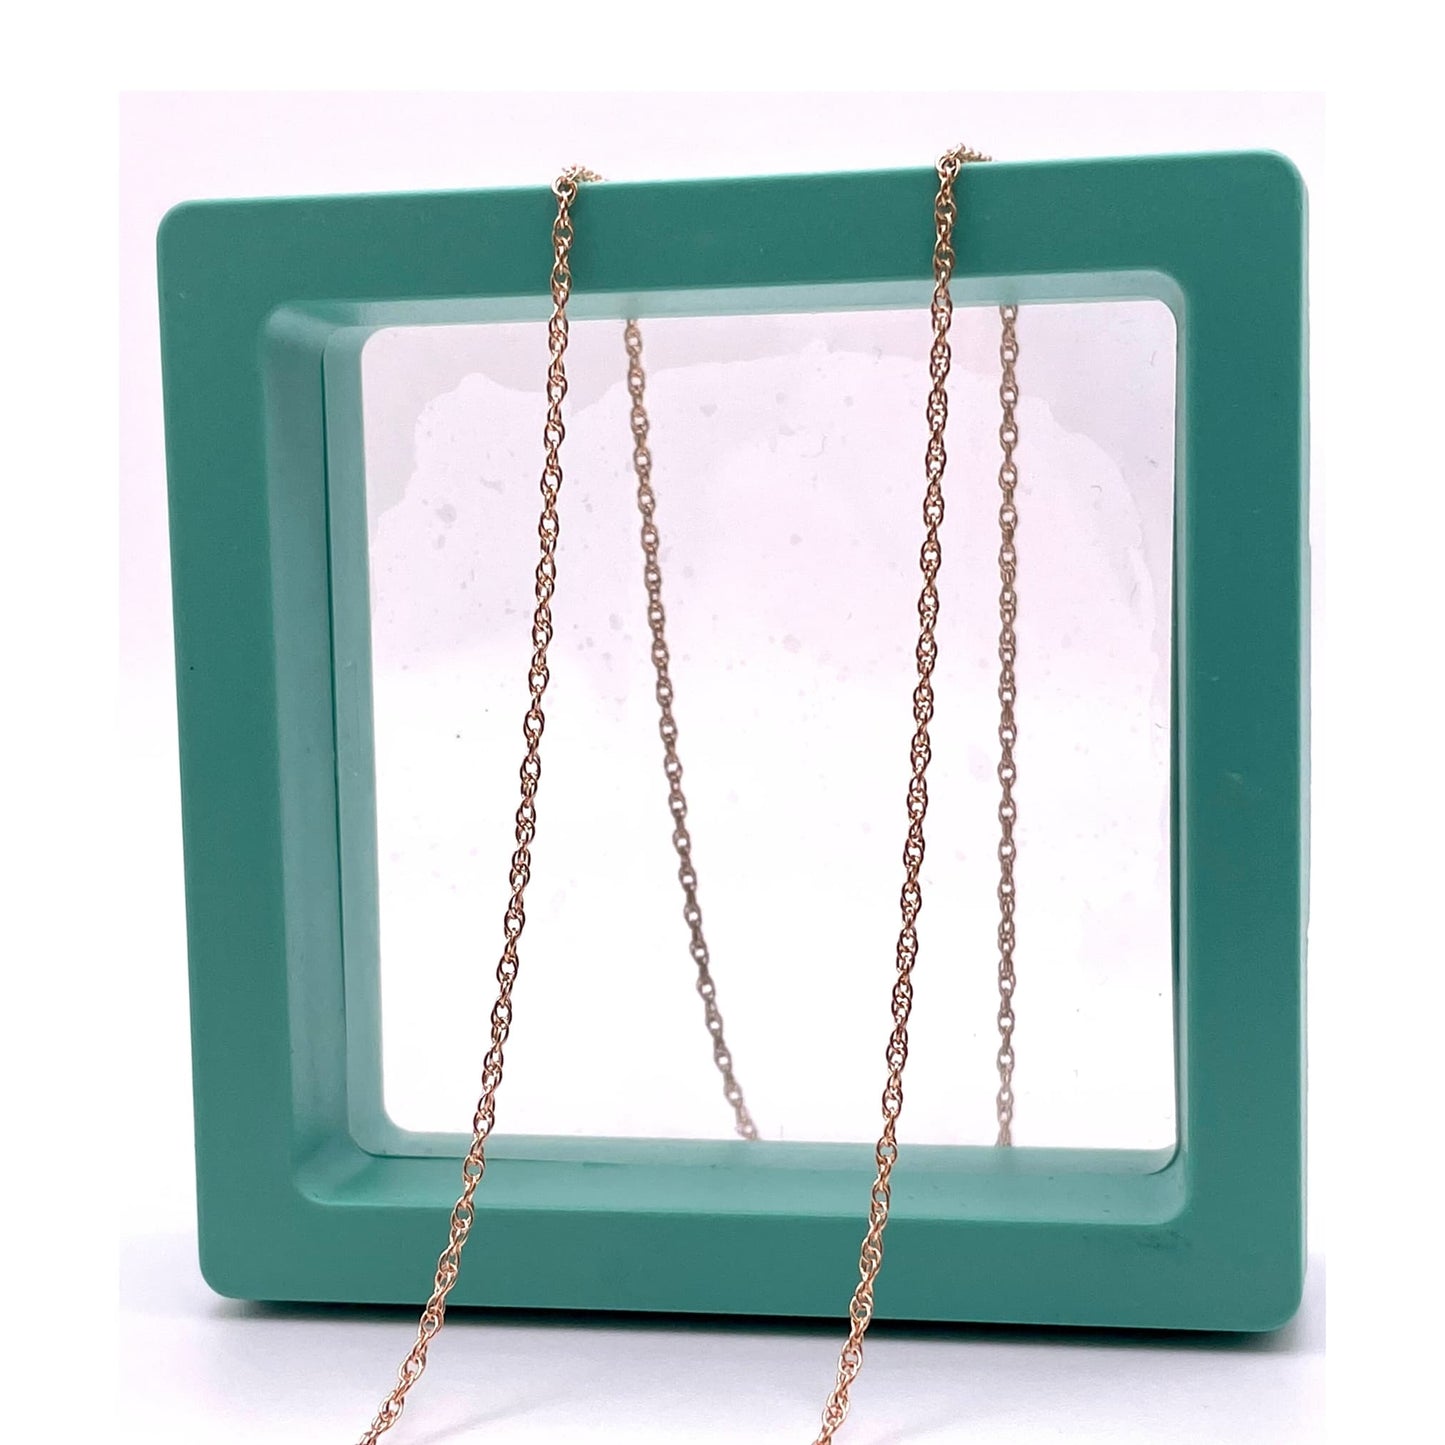 14k rose gold filled rope chain for permanent jewelry in a green hallow box.